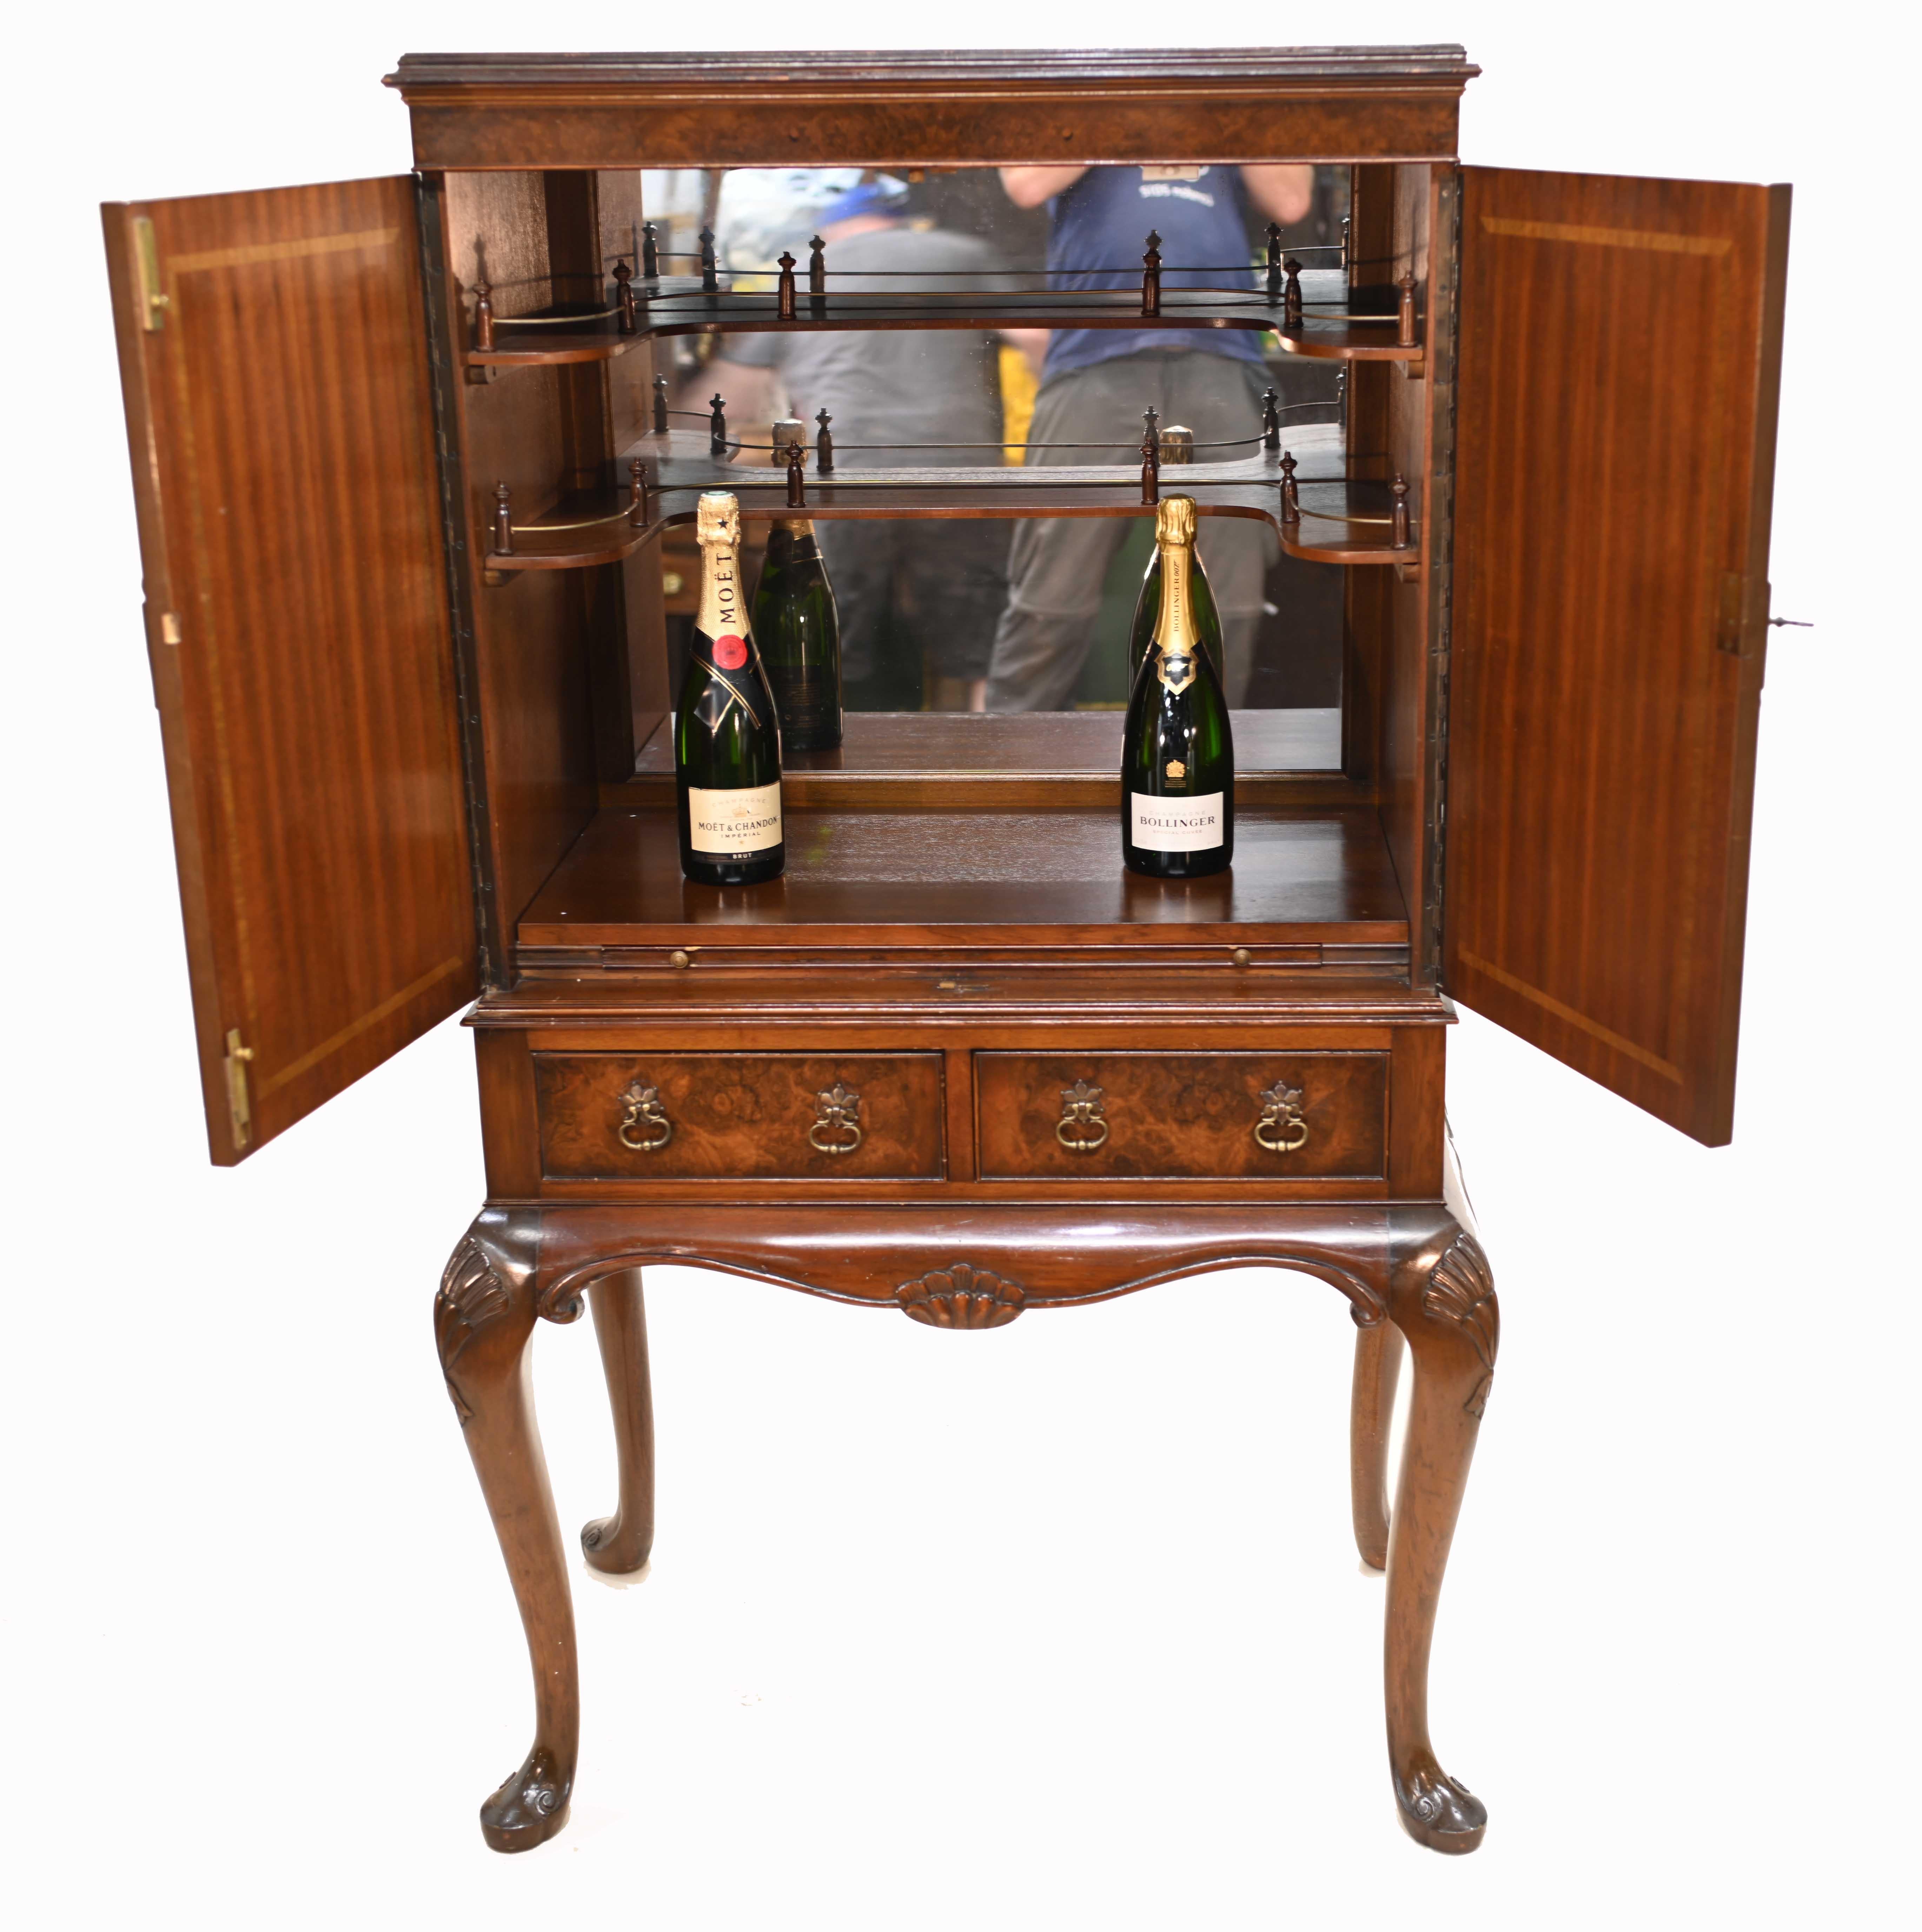 Mid-20th Century Art Deco Drinks Cabinet 1930 Epstein and Co Furniture